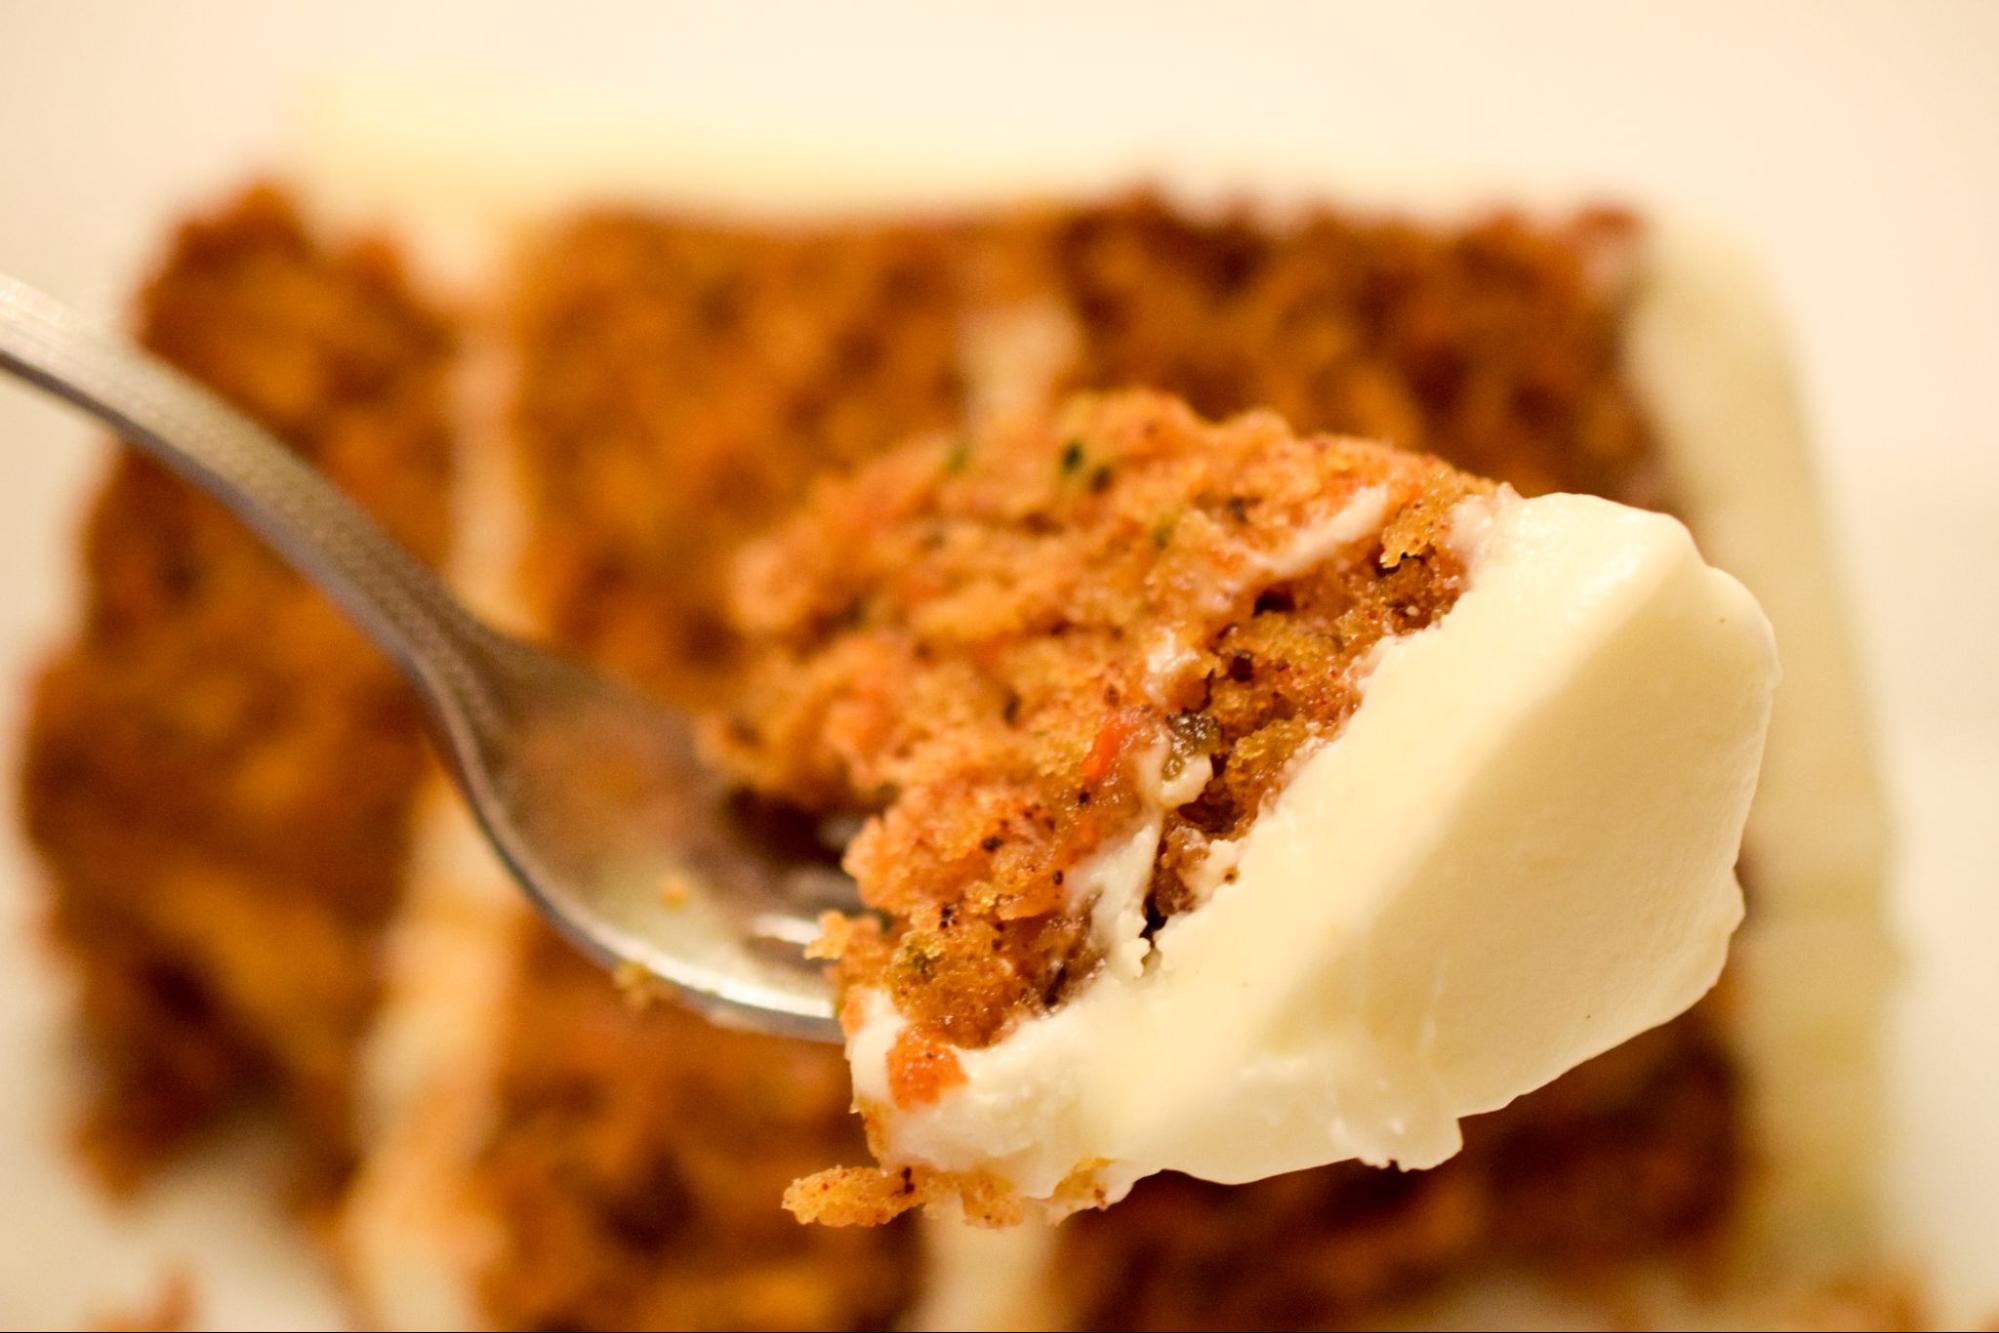 a forkful of carrot cake in front of a slice of carrot cake on a plate